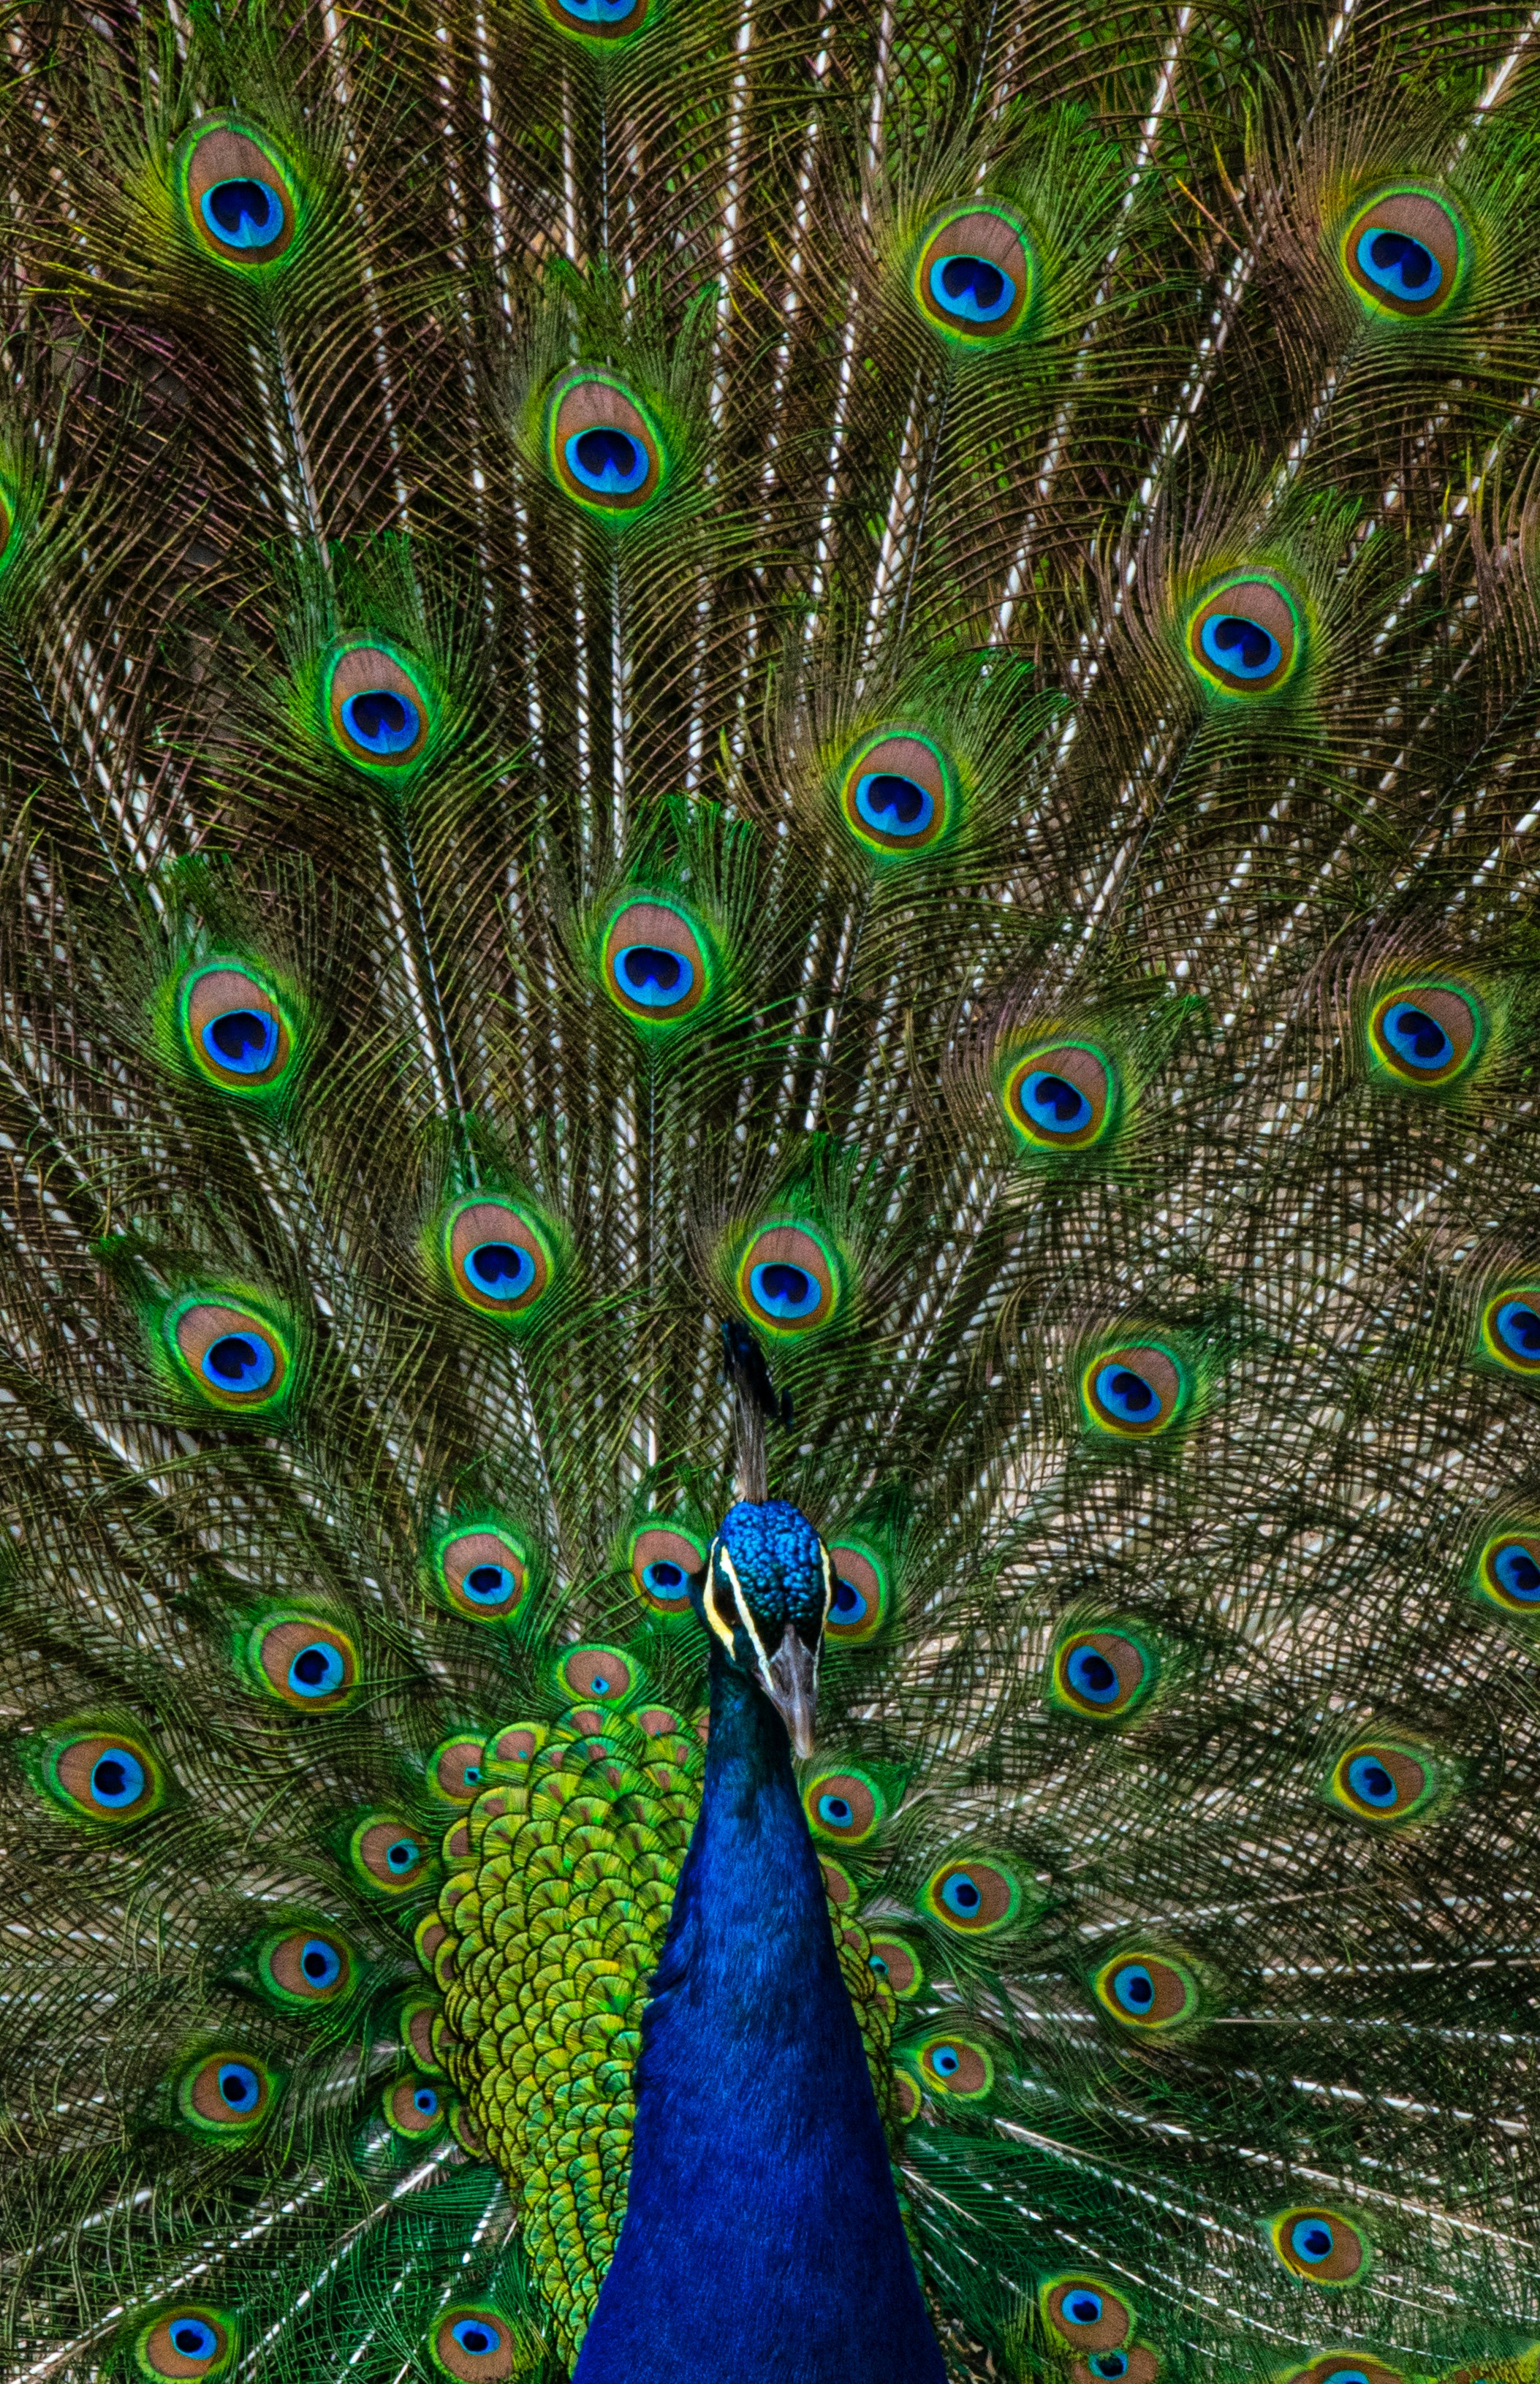 Peacock Feathers: Astrological, Spiritual Significance And Remedies 